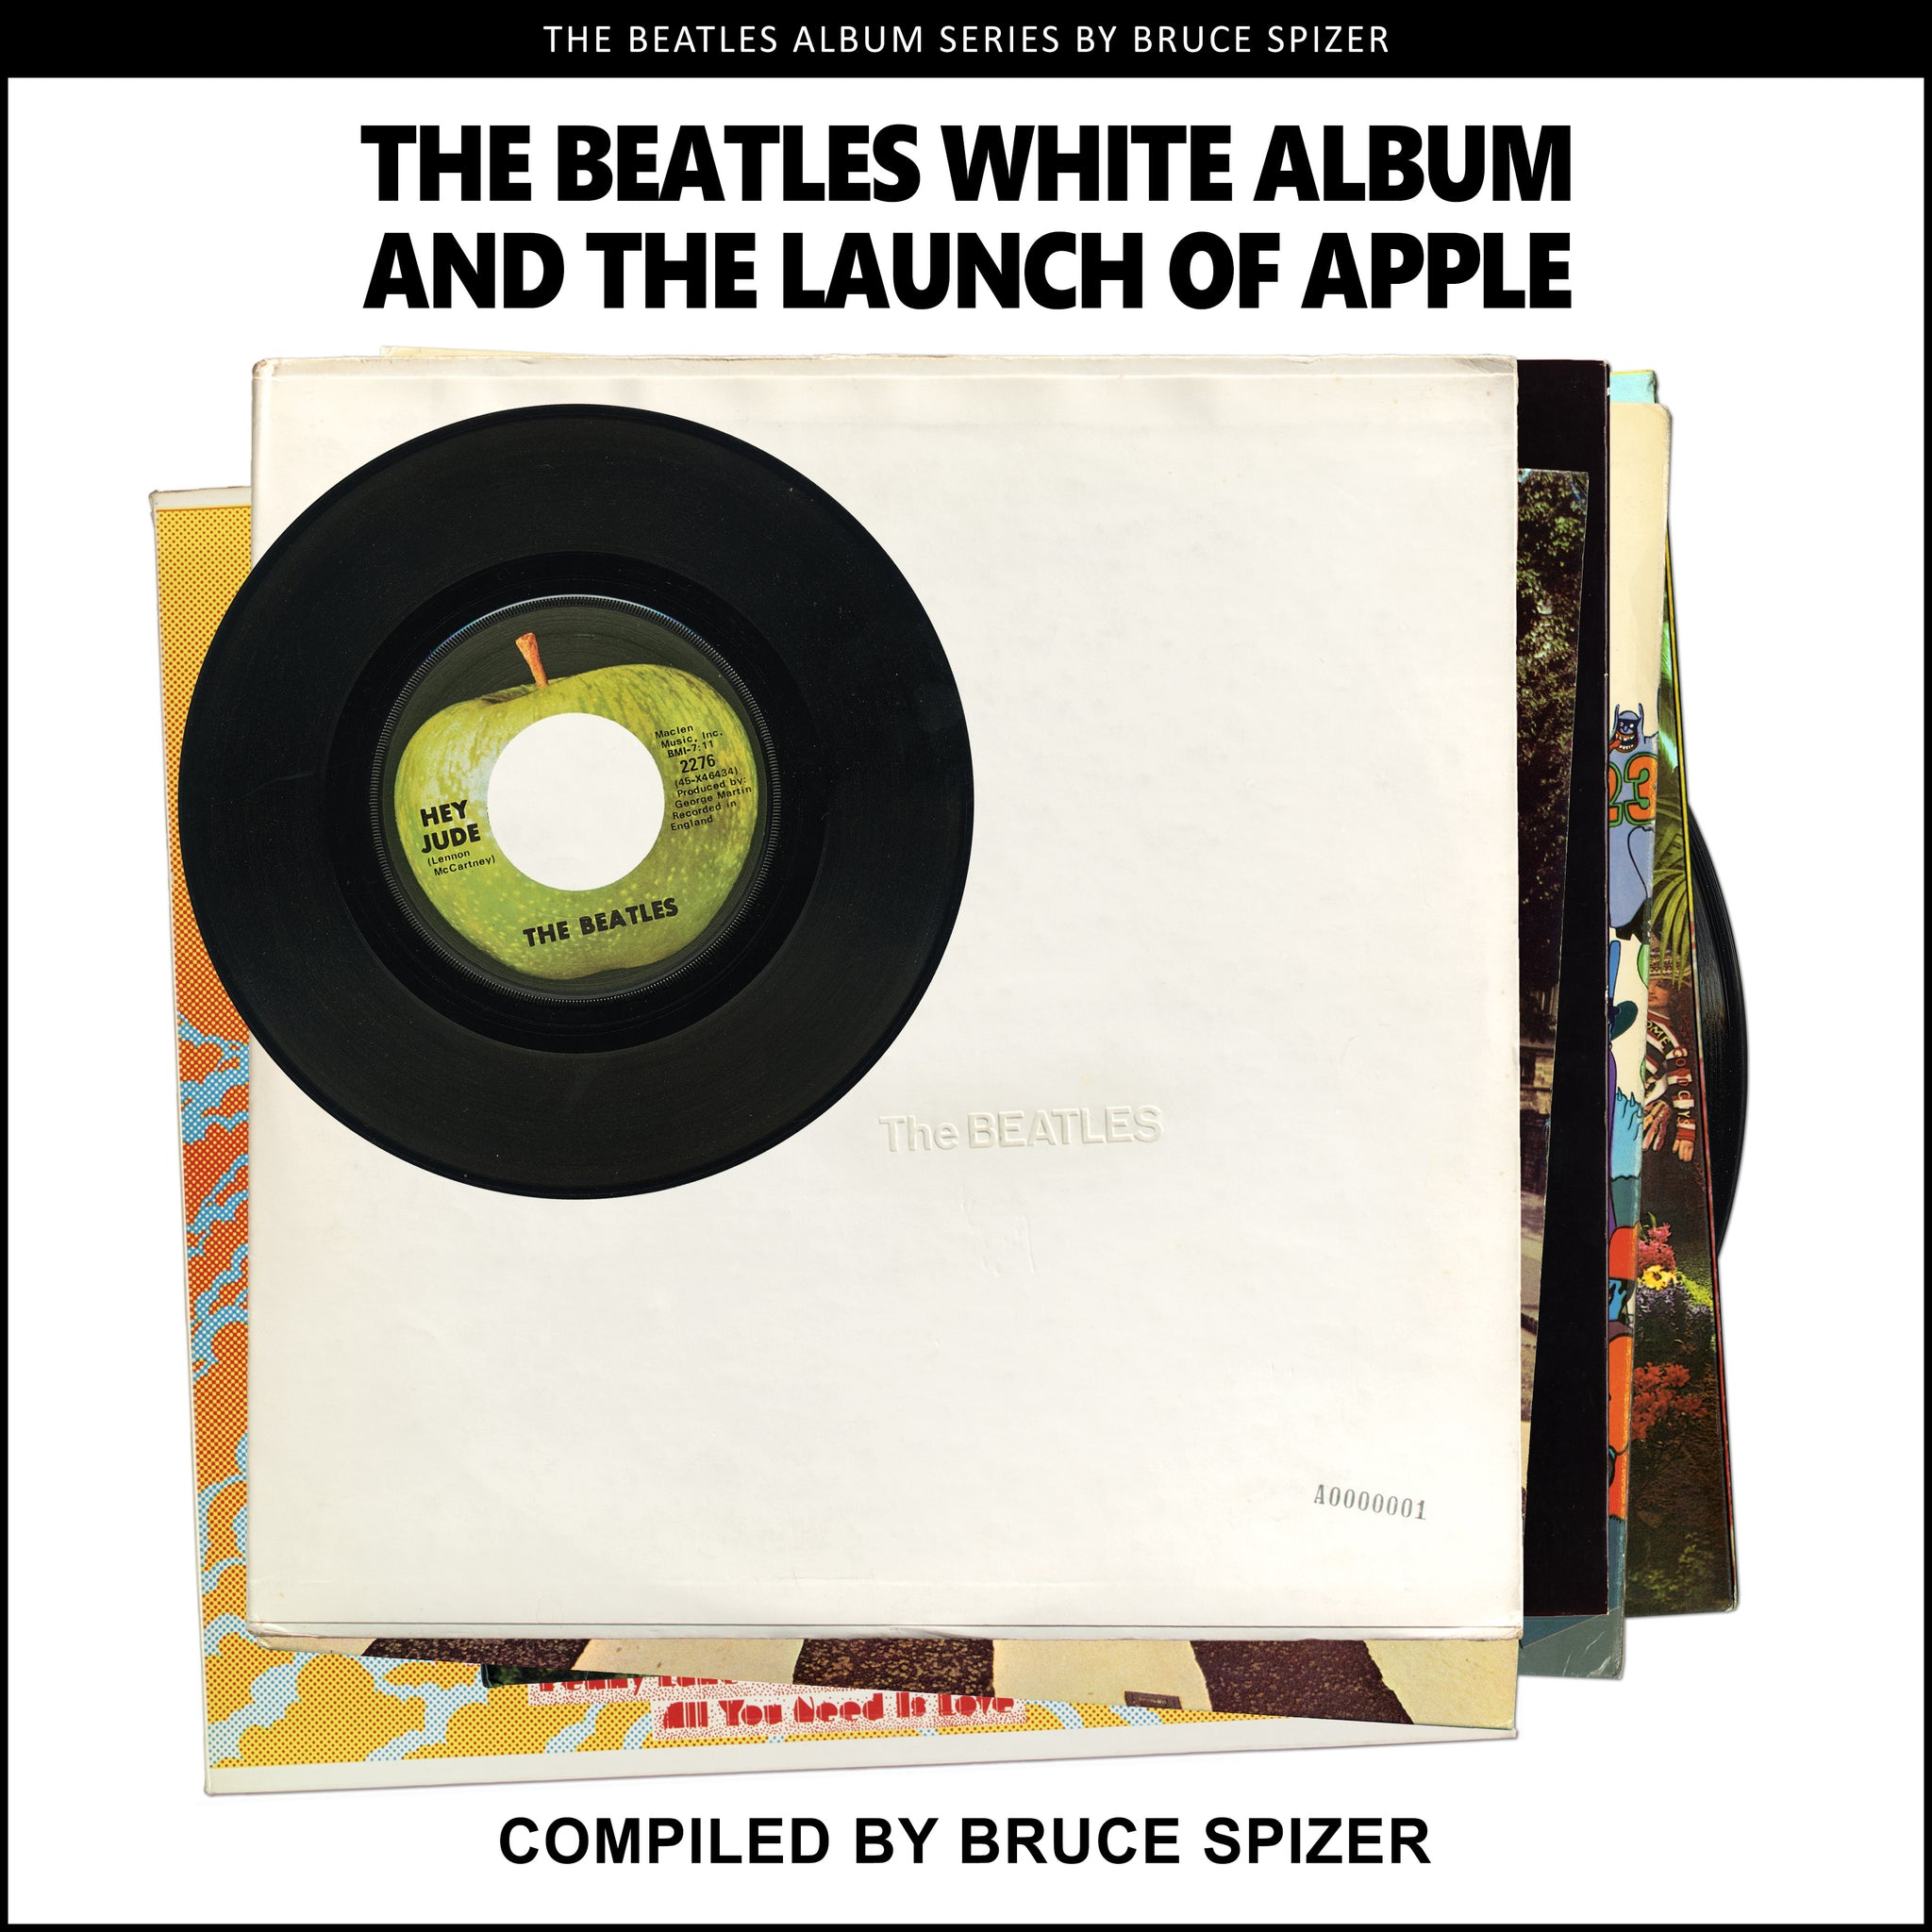 The Beatles White Album and The Launch of Apple - The Beatles 